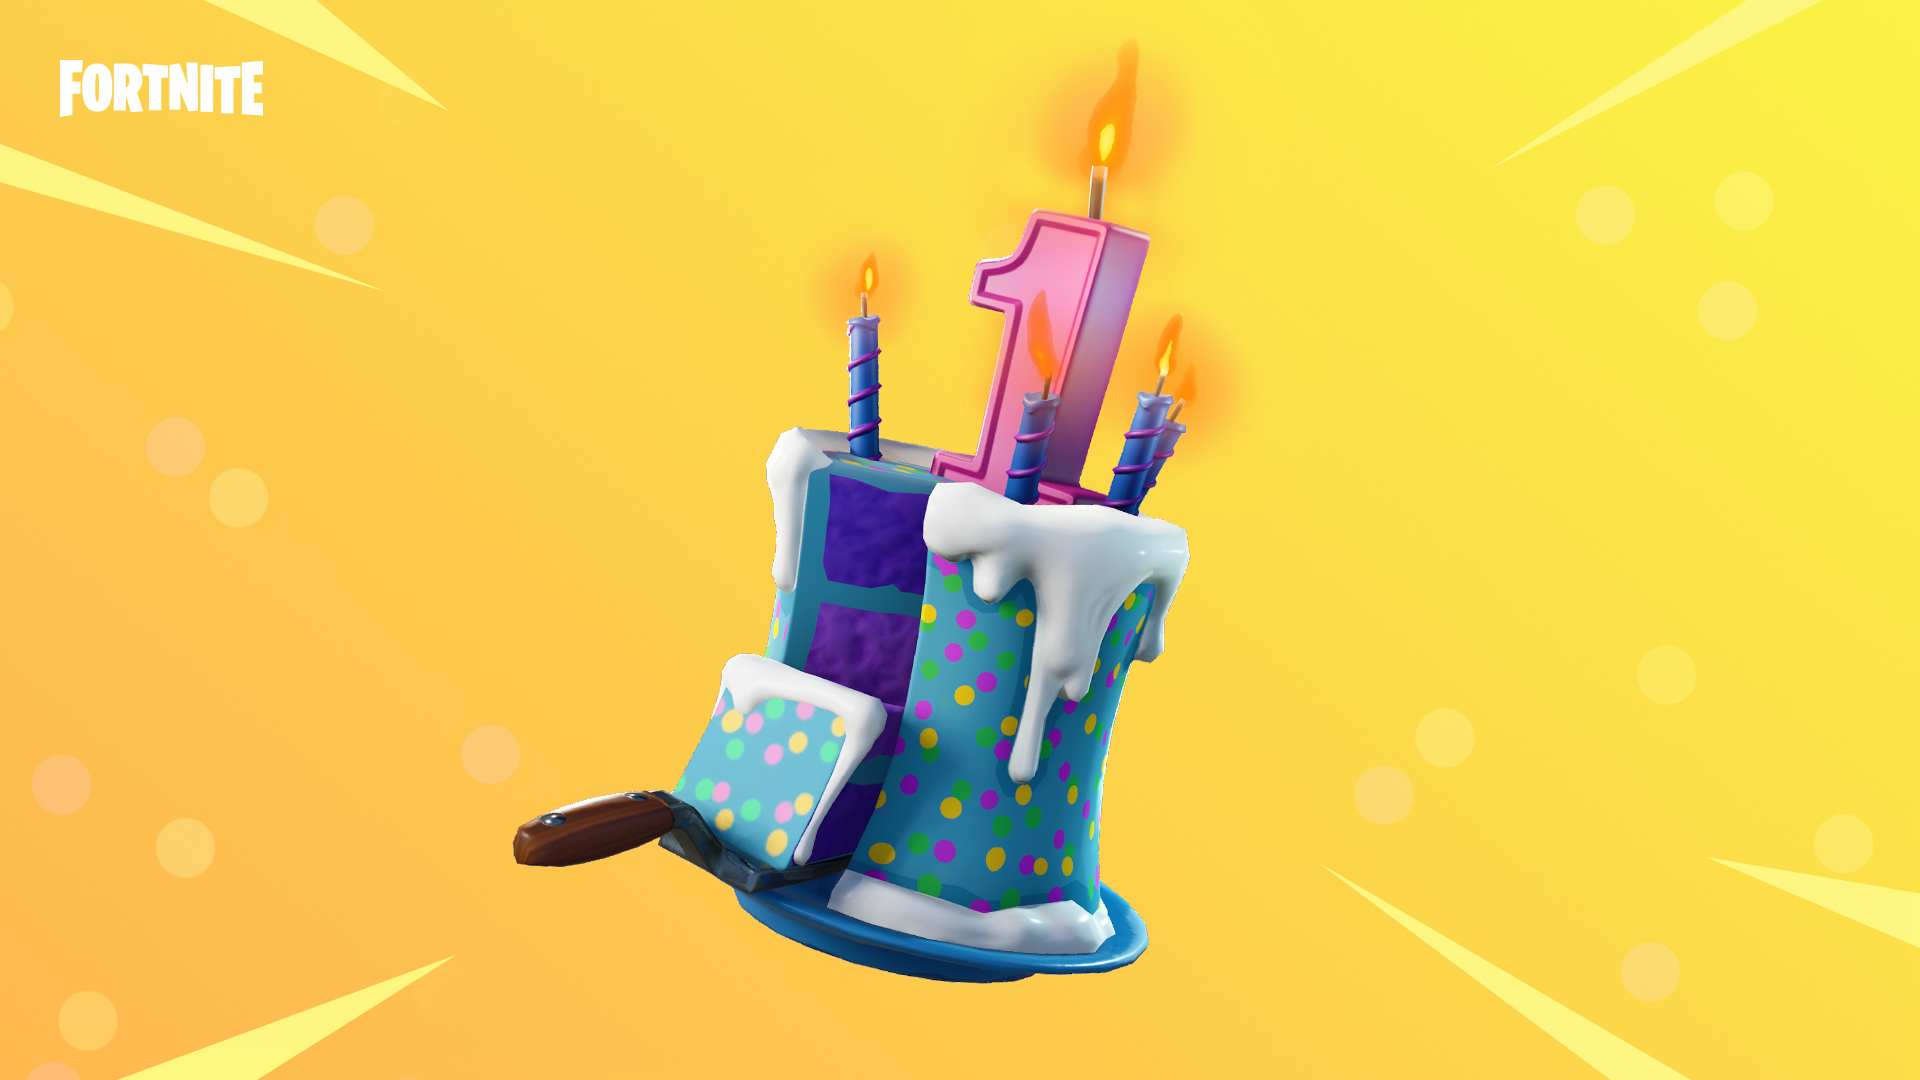 Fortnite Birthday Cake Locations Where to Find Every Cake on the Map